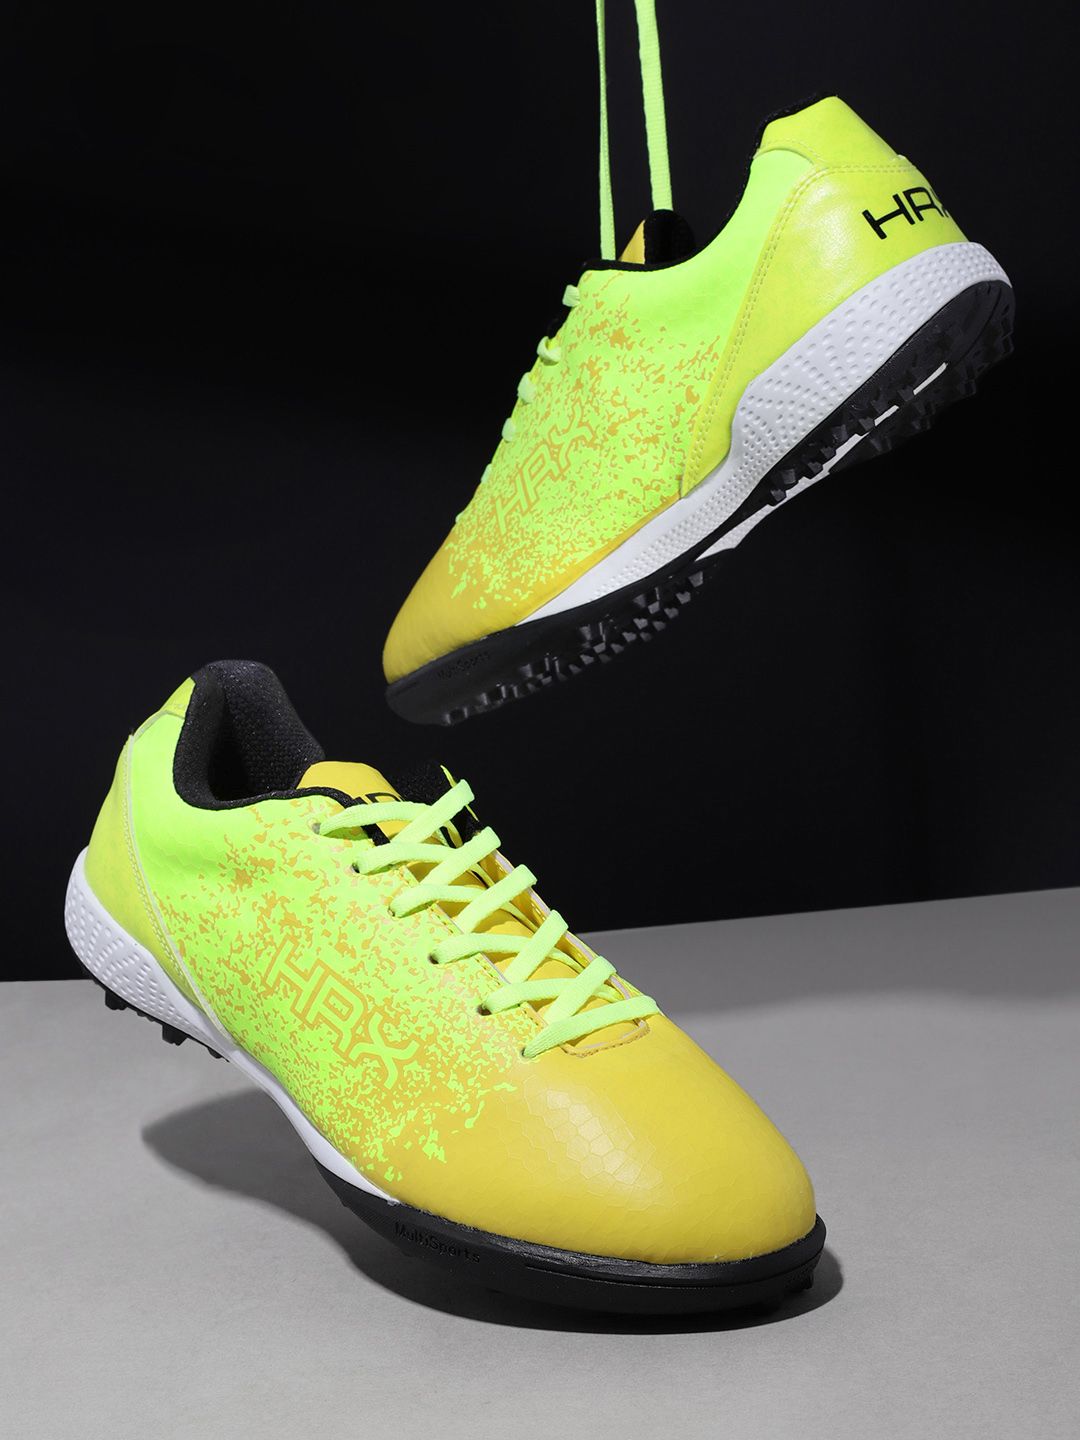 HRX by Hrithik Roshan Unisex Fluorescent Green & Yellow Football Shoes Price in India